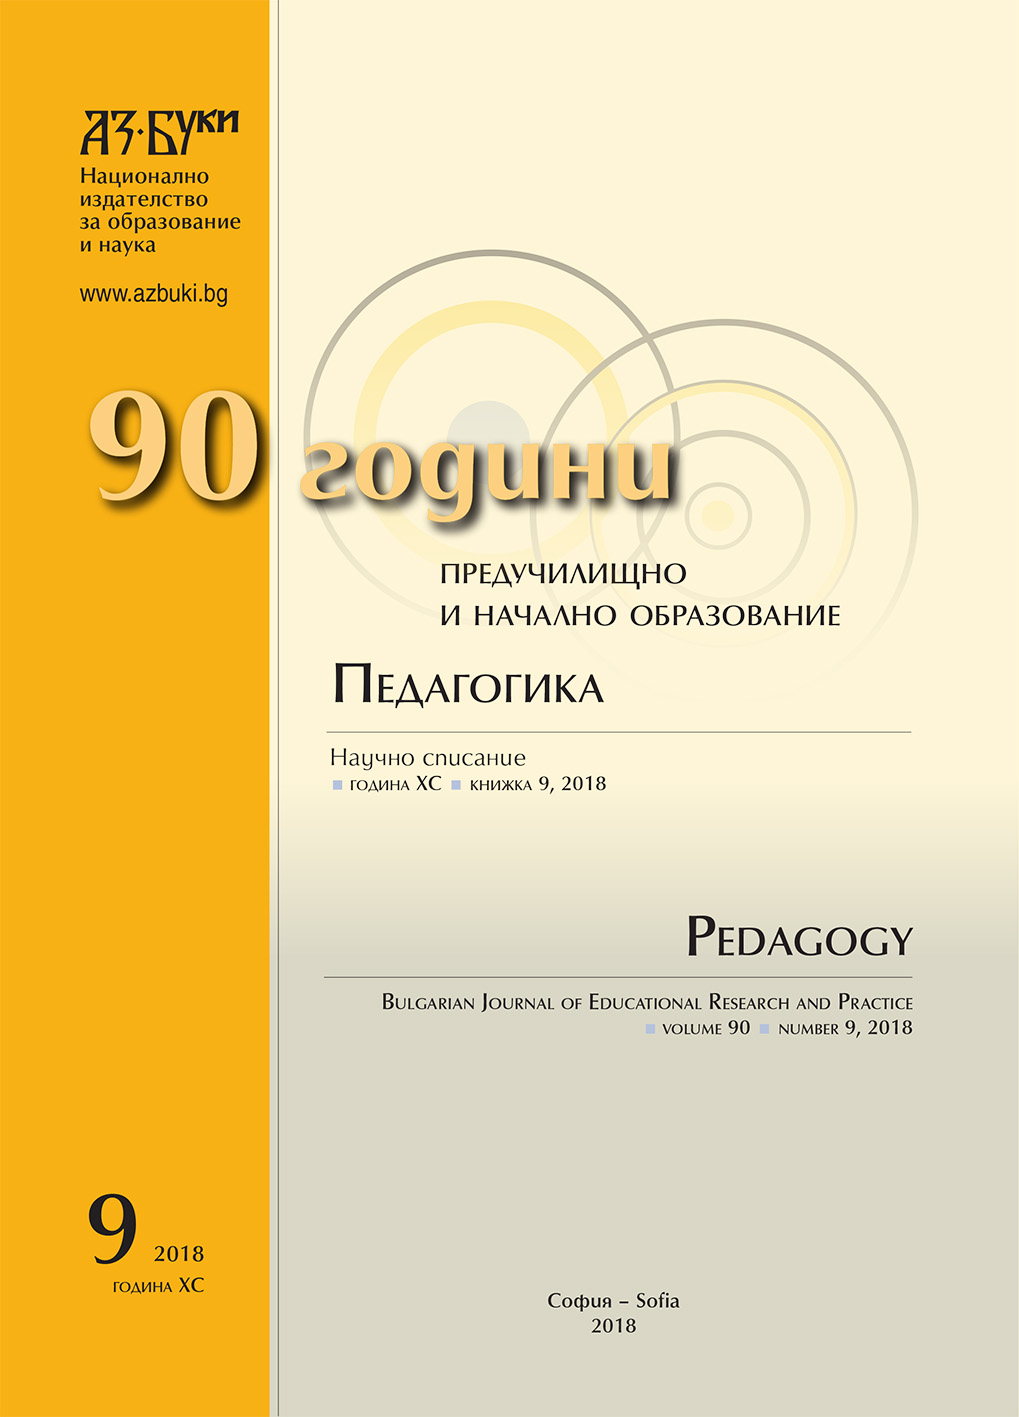 Child Protection in Bulgaria (Historical Overview) Cover Image